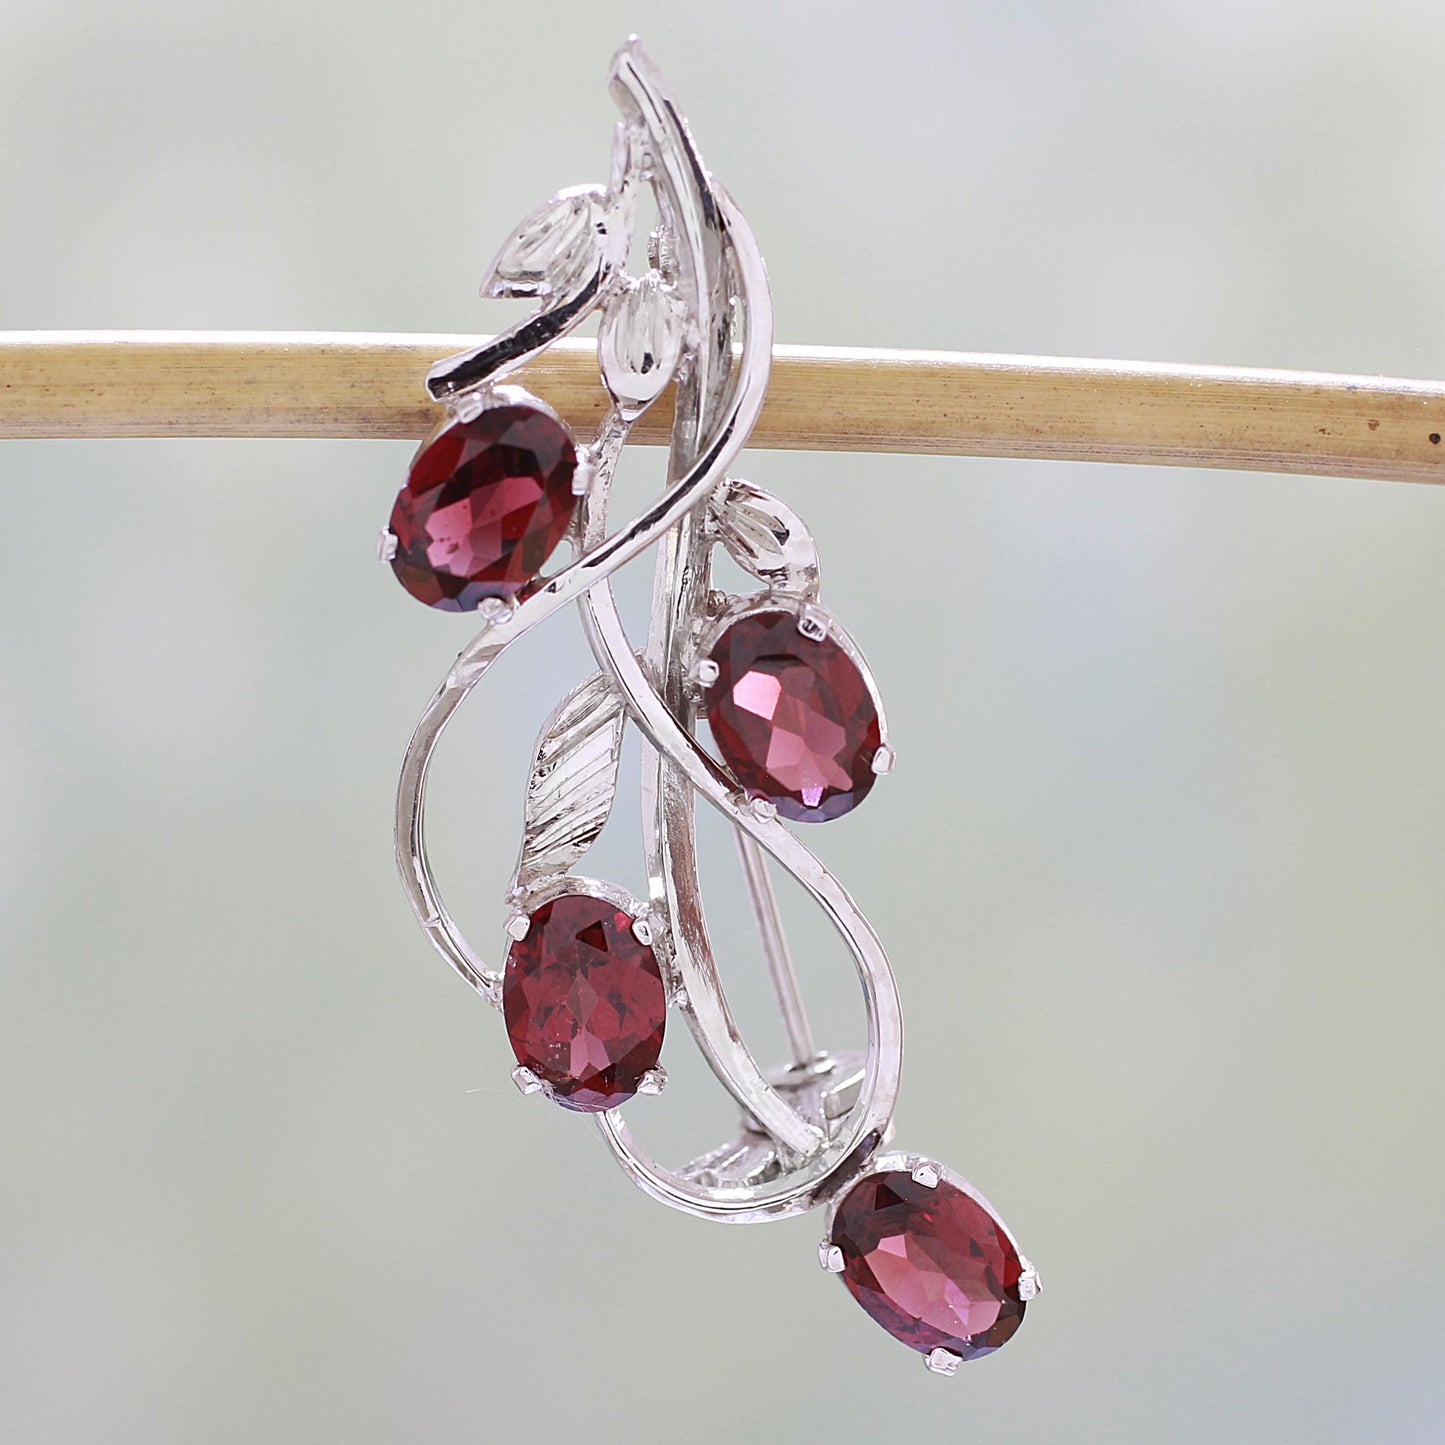 Taste of Autumn Garnet and Sterling Silver Leafy Brooch from India